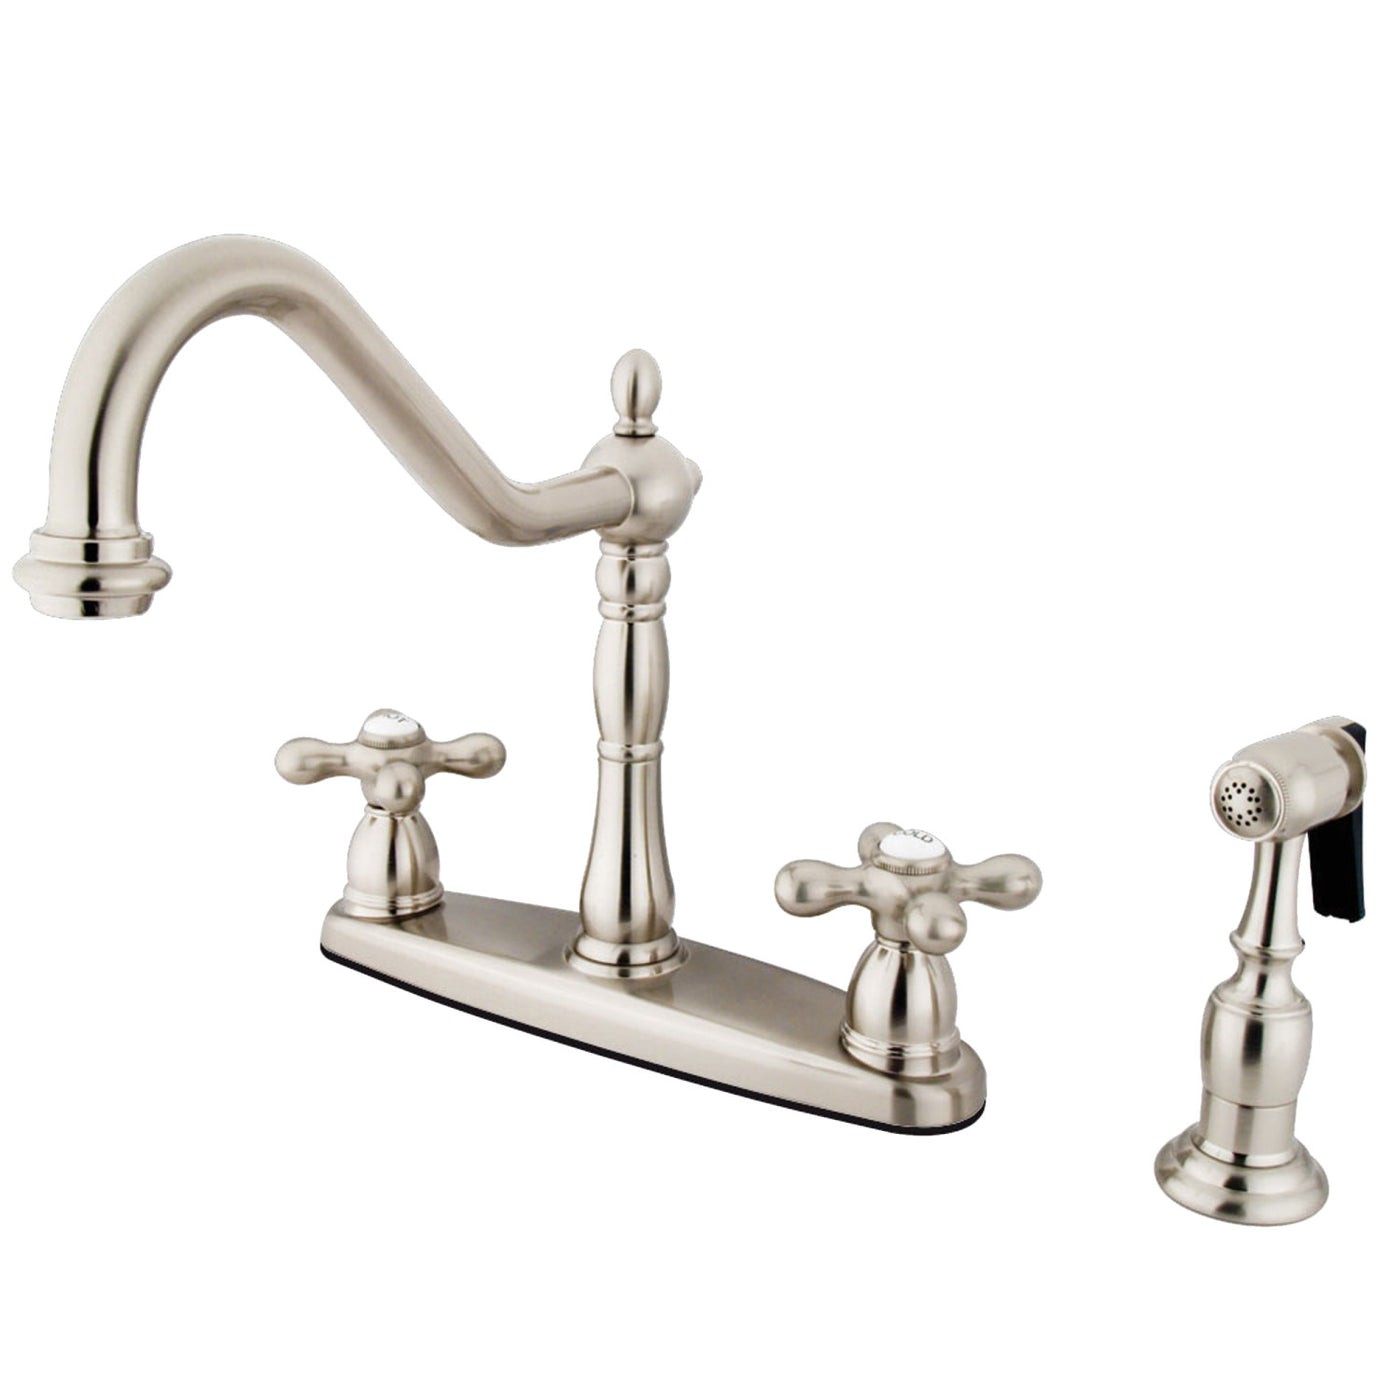 Elements of Design EB1758AXBS Centerset Kitchen Faucet, Brushed Nickel